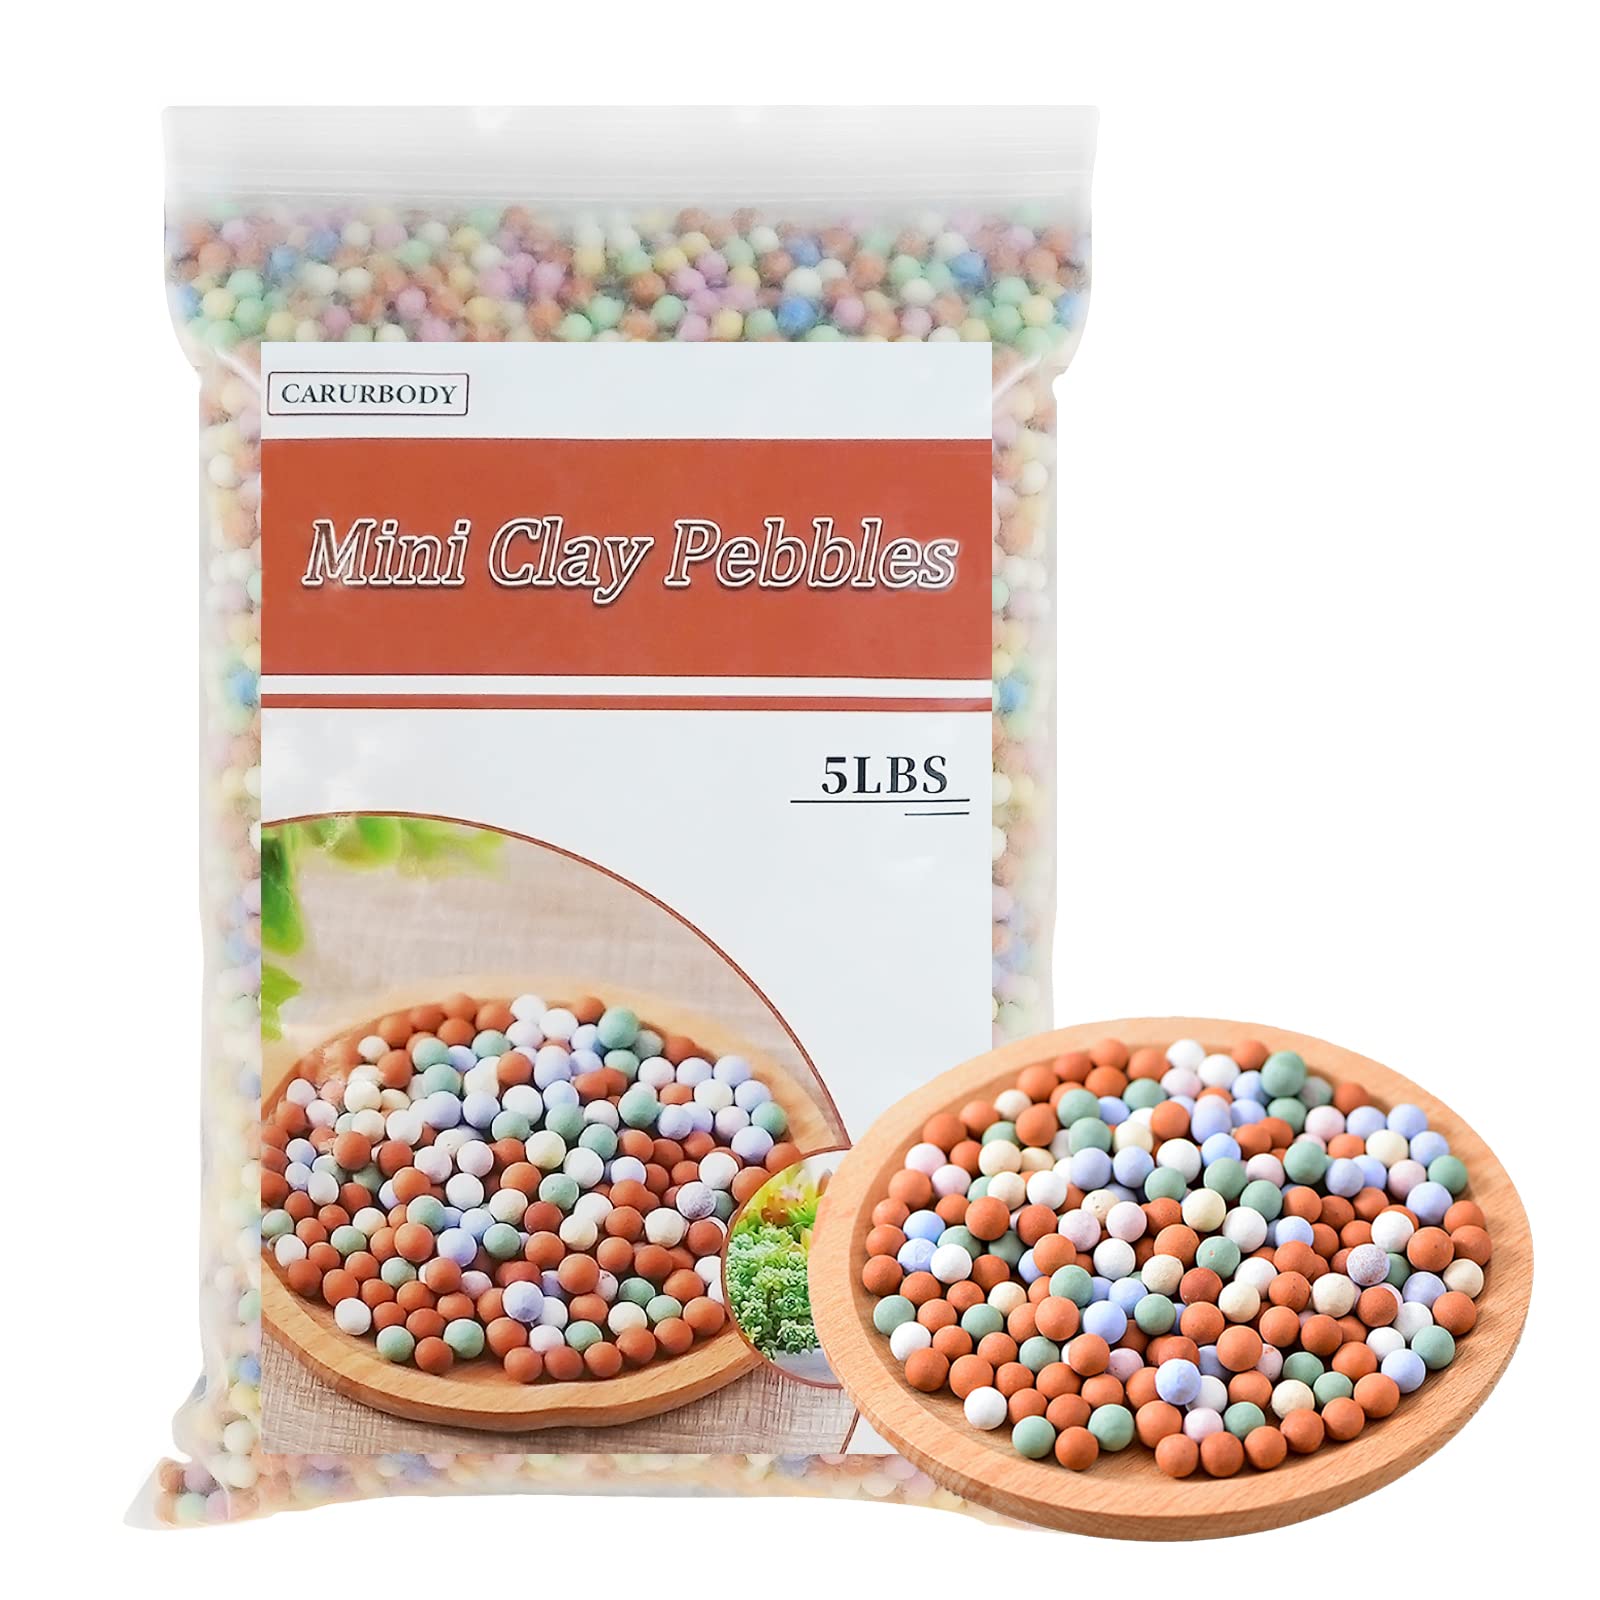 CARURBODY 5LBS Ceramsite Clay Pebbles for Orchid - Mini Leca Clay Pebble for Plants Drainage - Perfect Ceramsite Balls as A Soil